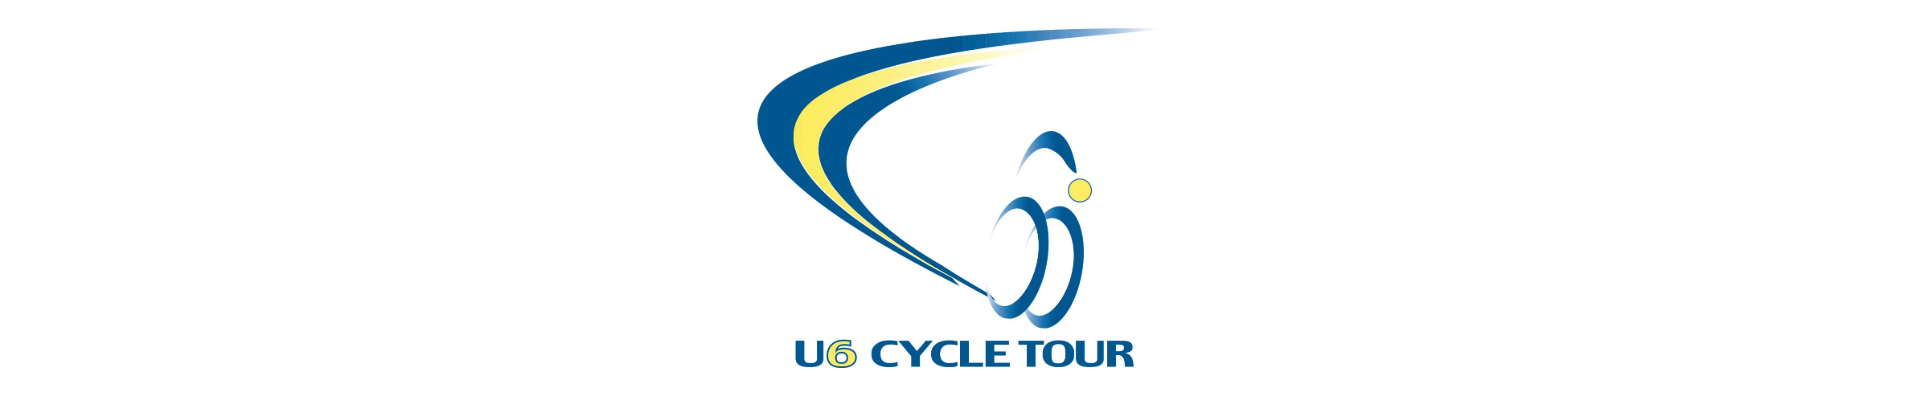 U6 Cycle Tour - stage 4